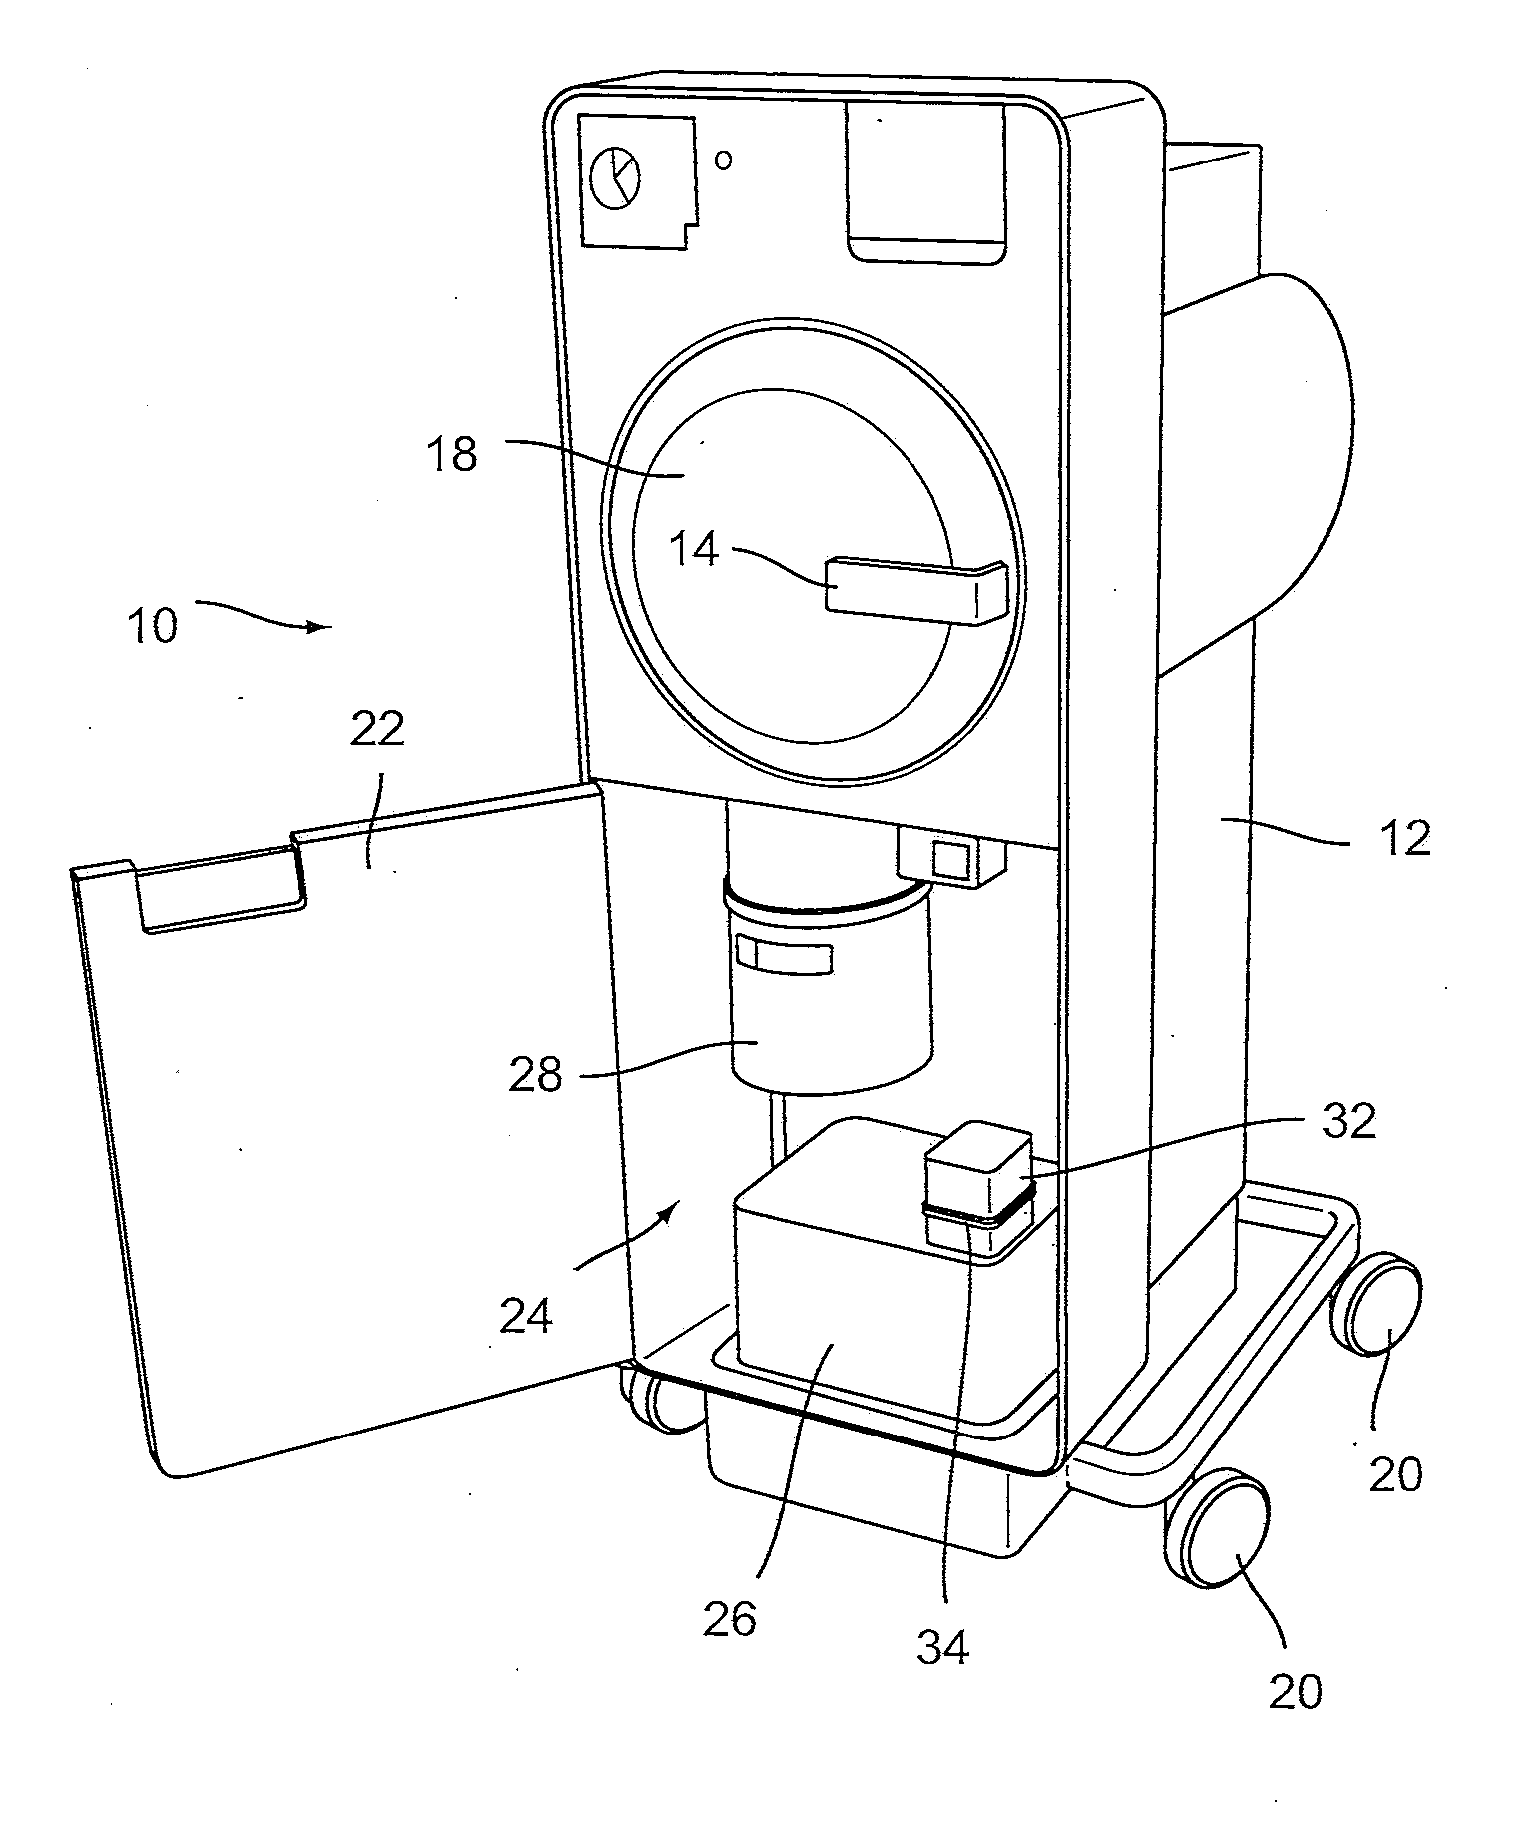 Device and method for gas sterilization